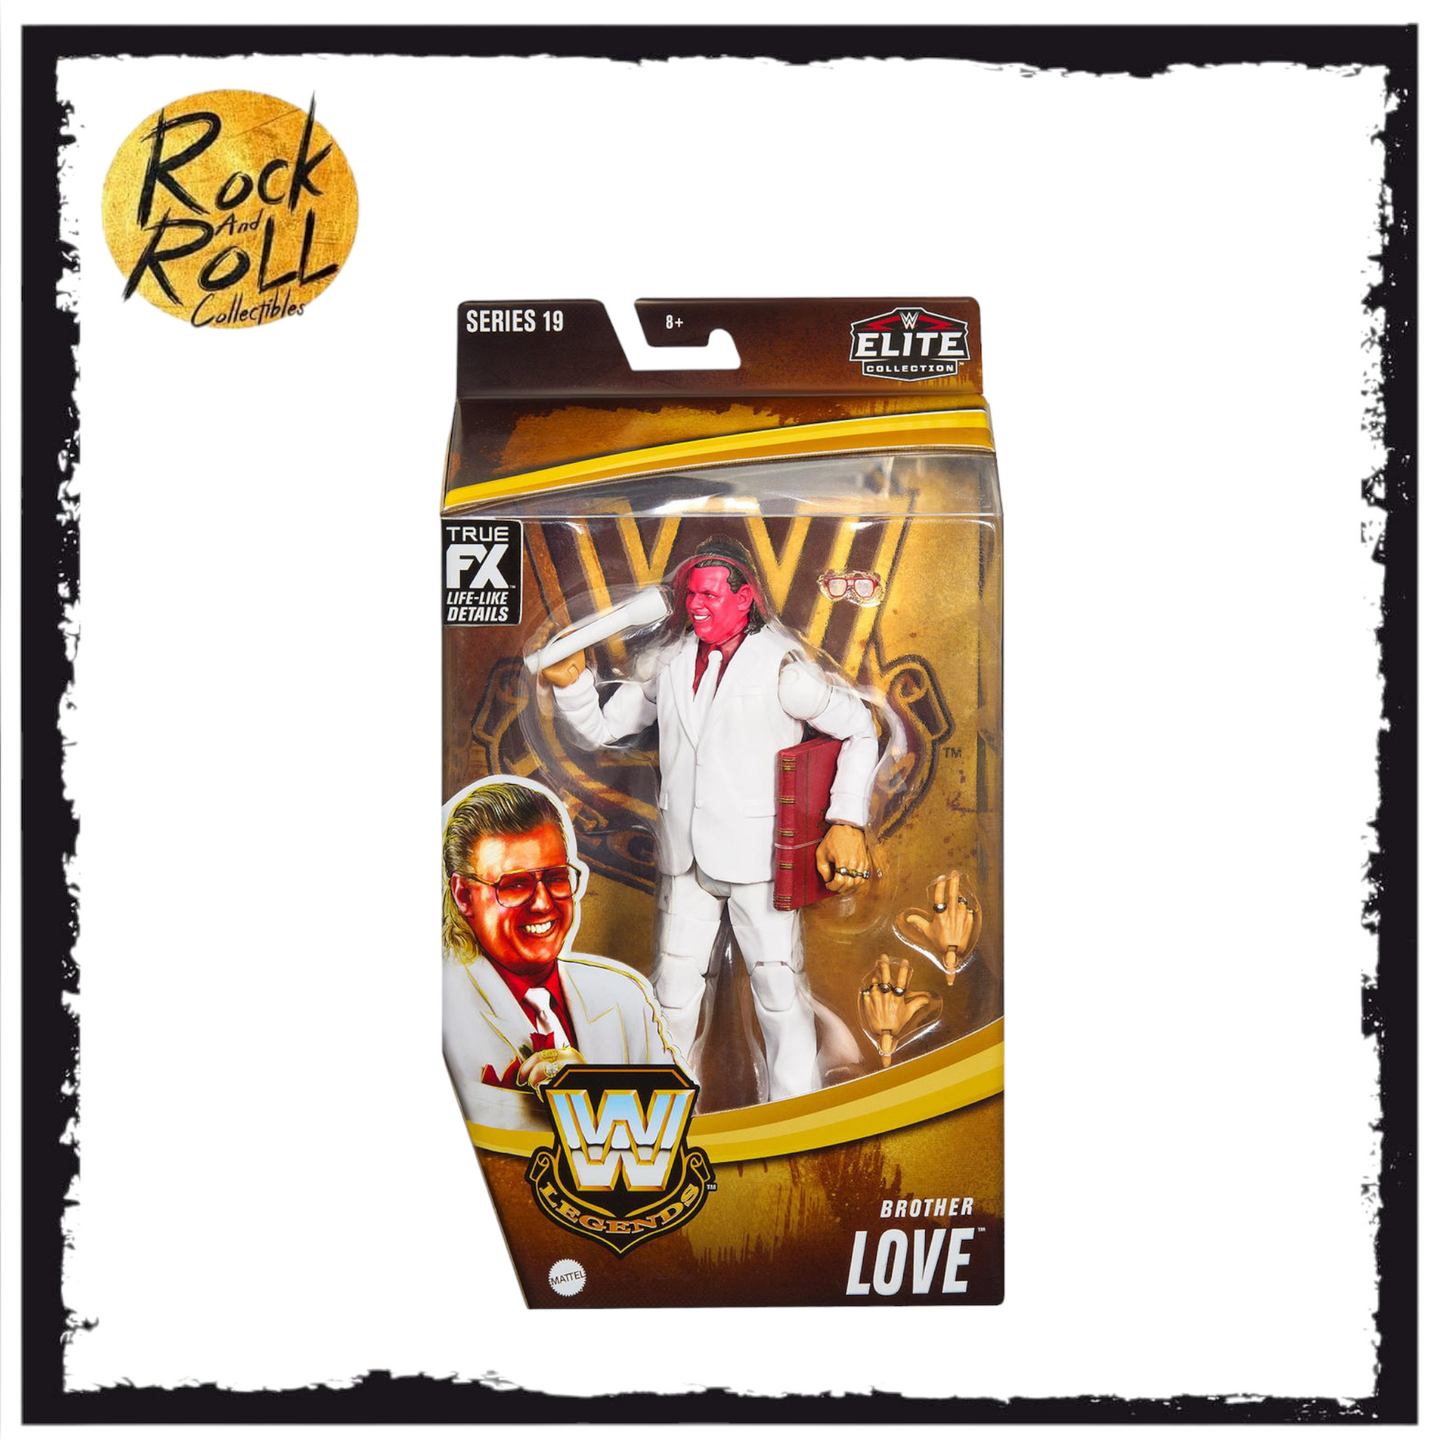 WWE Legends Series 19 - Brother Love - UK Release